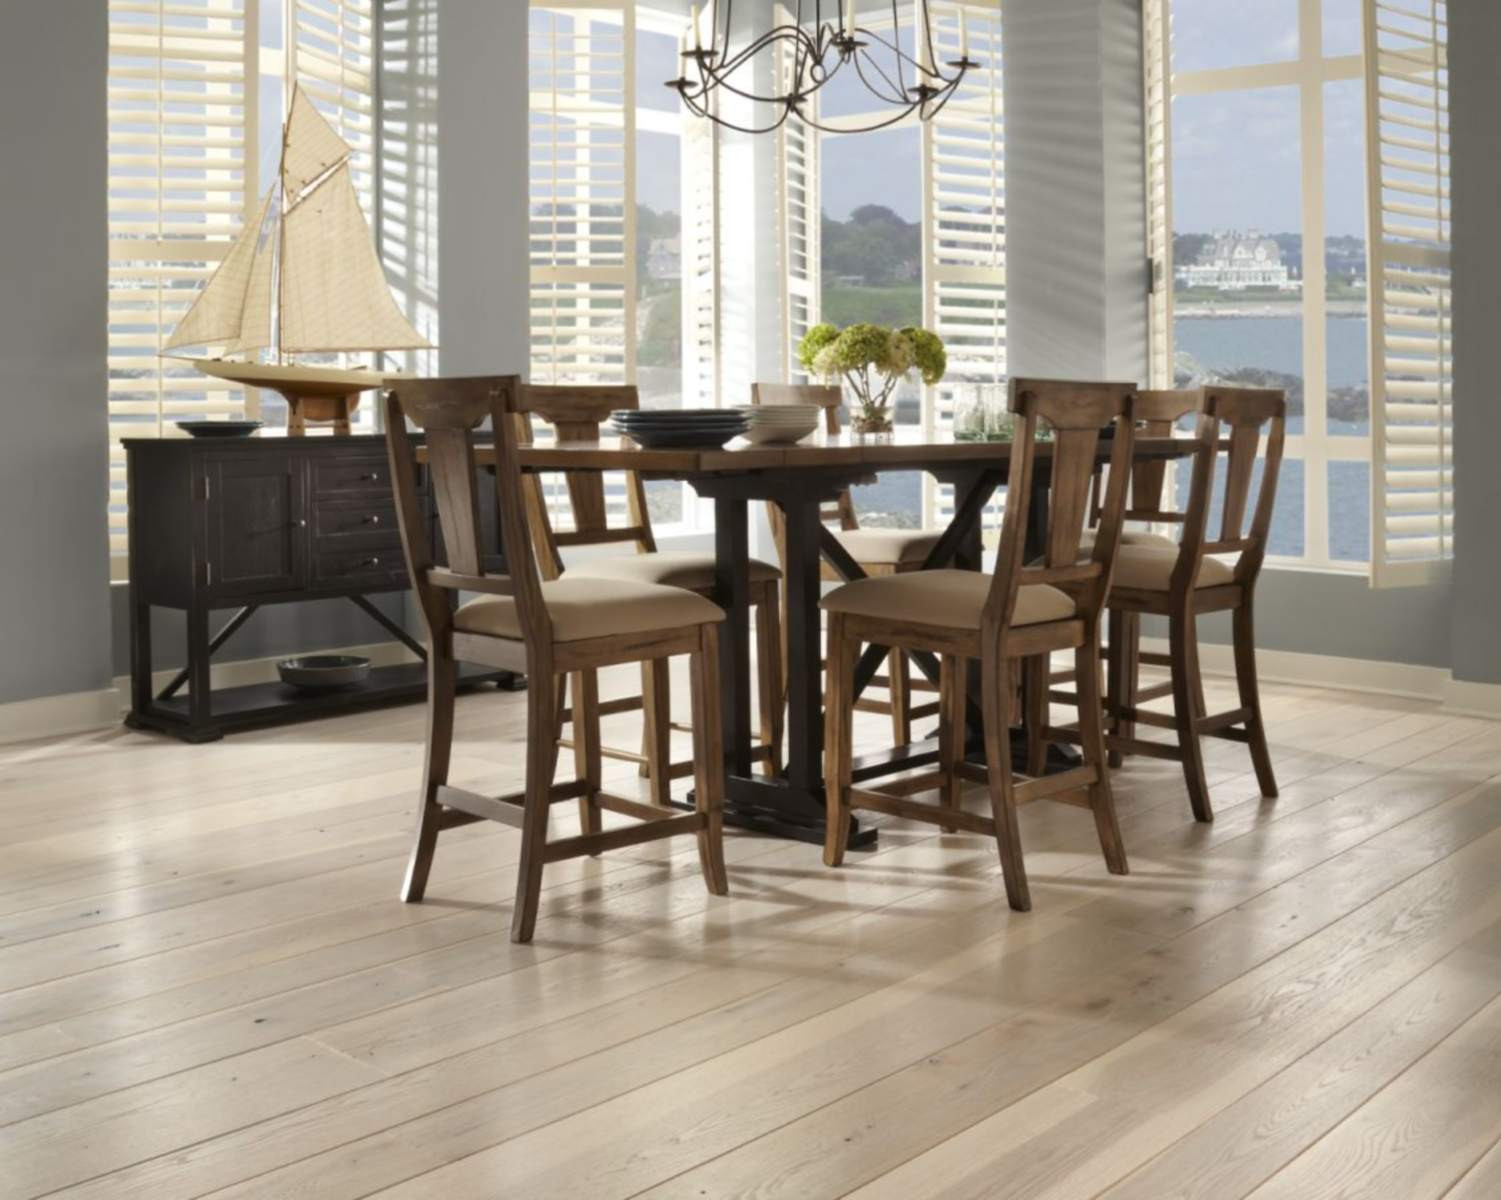 19 Great Hardwood Floor Colors 2017 2024 free download hardwood floor colors 2017 of top 5 brands for solid hardwood flooring within a dining room with carlisle hickorys wide plank flooring